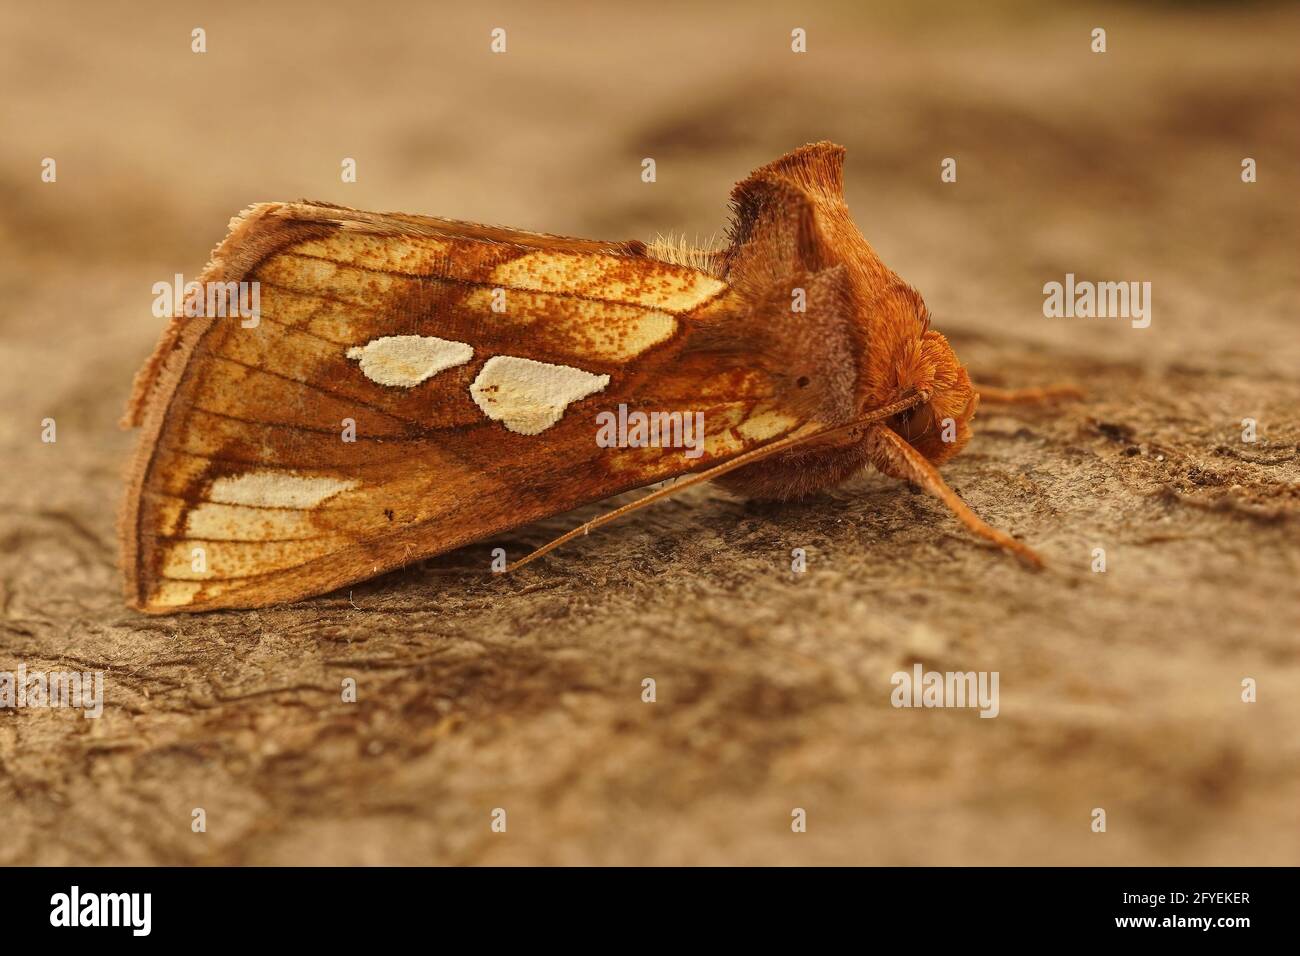 Close-up shot of the colorful gold spot moth, Plusia festucae on a piece of wood. Stock Photo